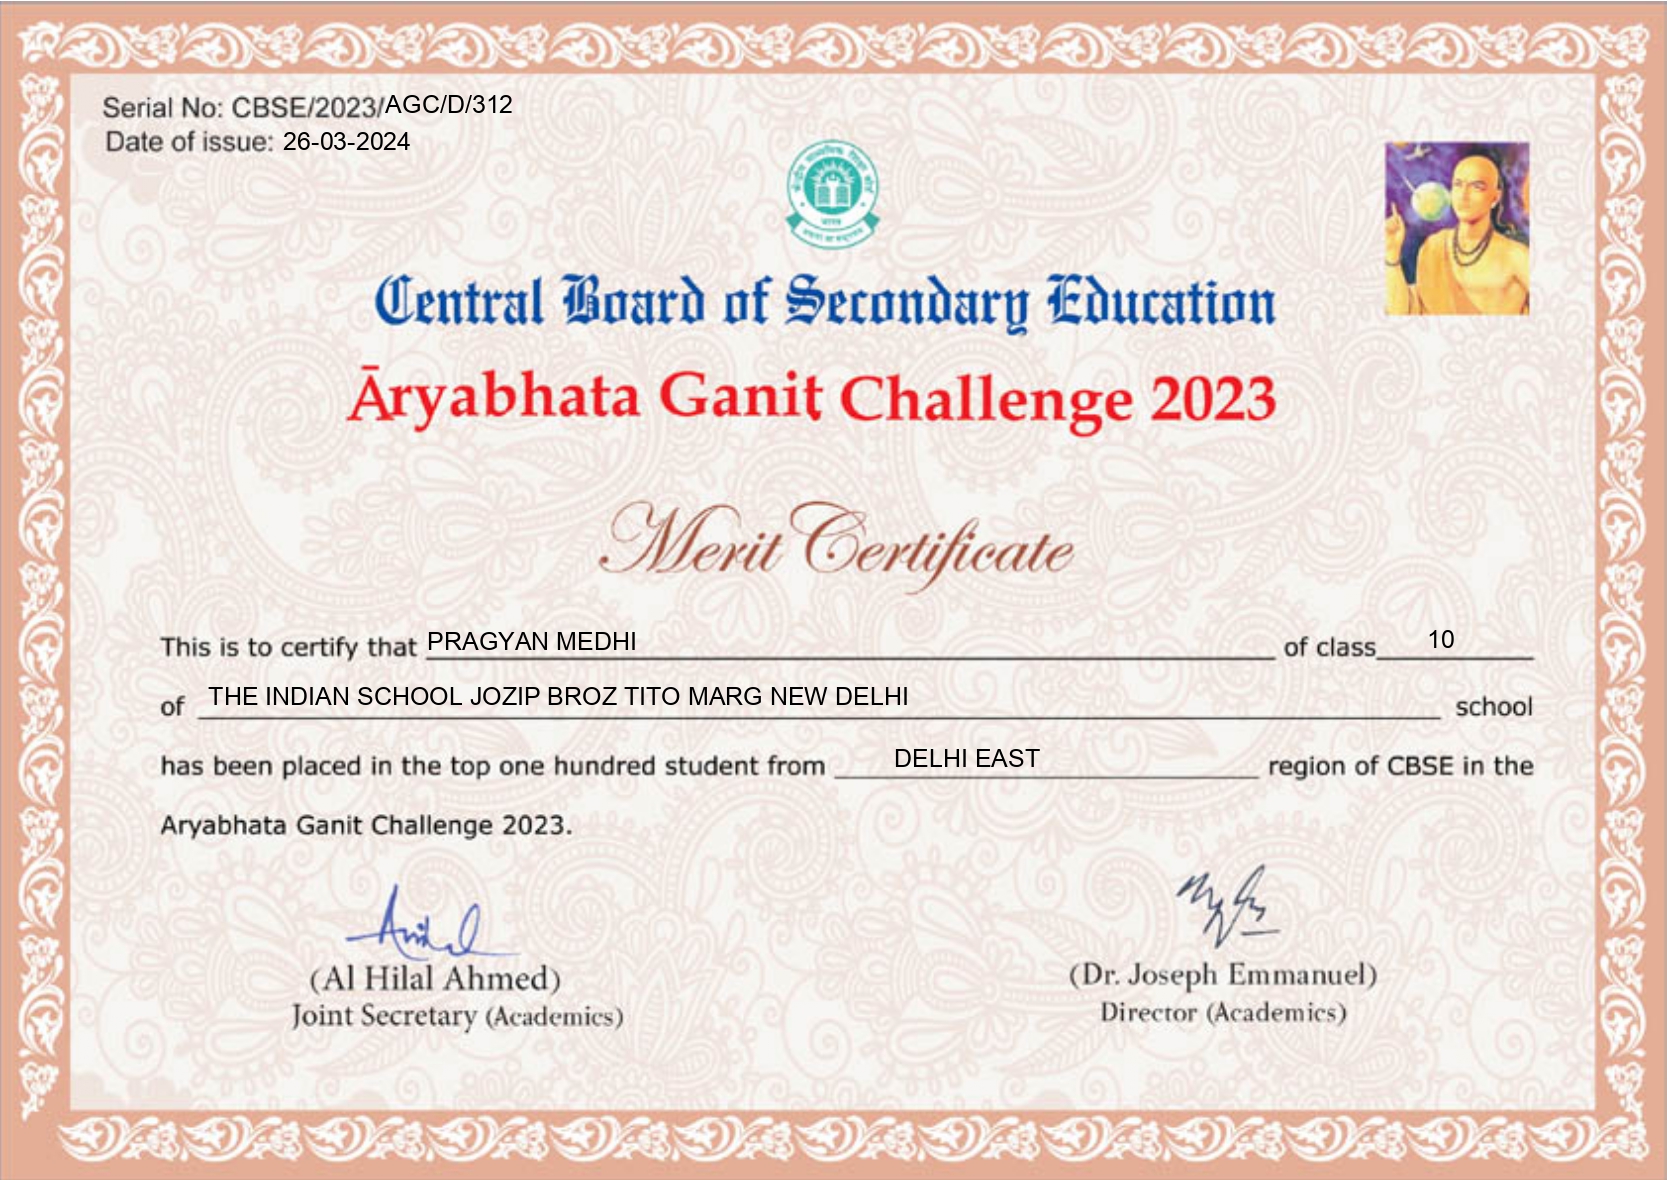 In the Aryabhata Ganit Challenge 2023, Pragyan Medhi of class X...Click here to read more